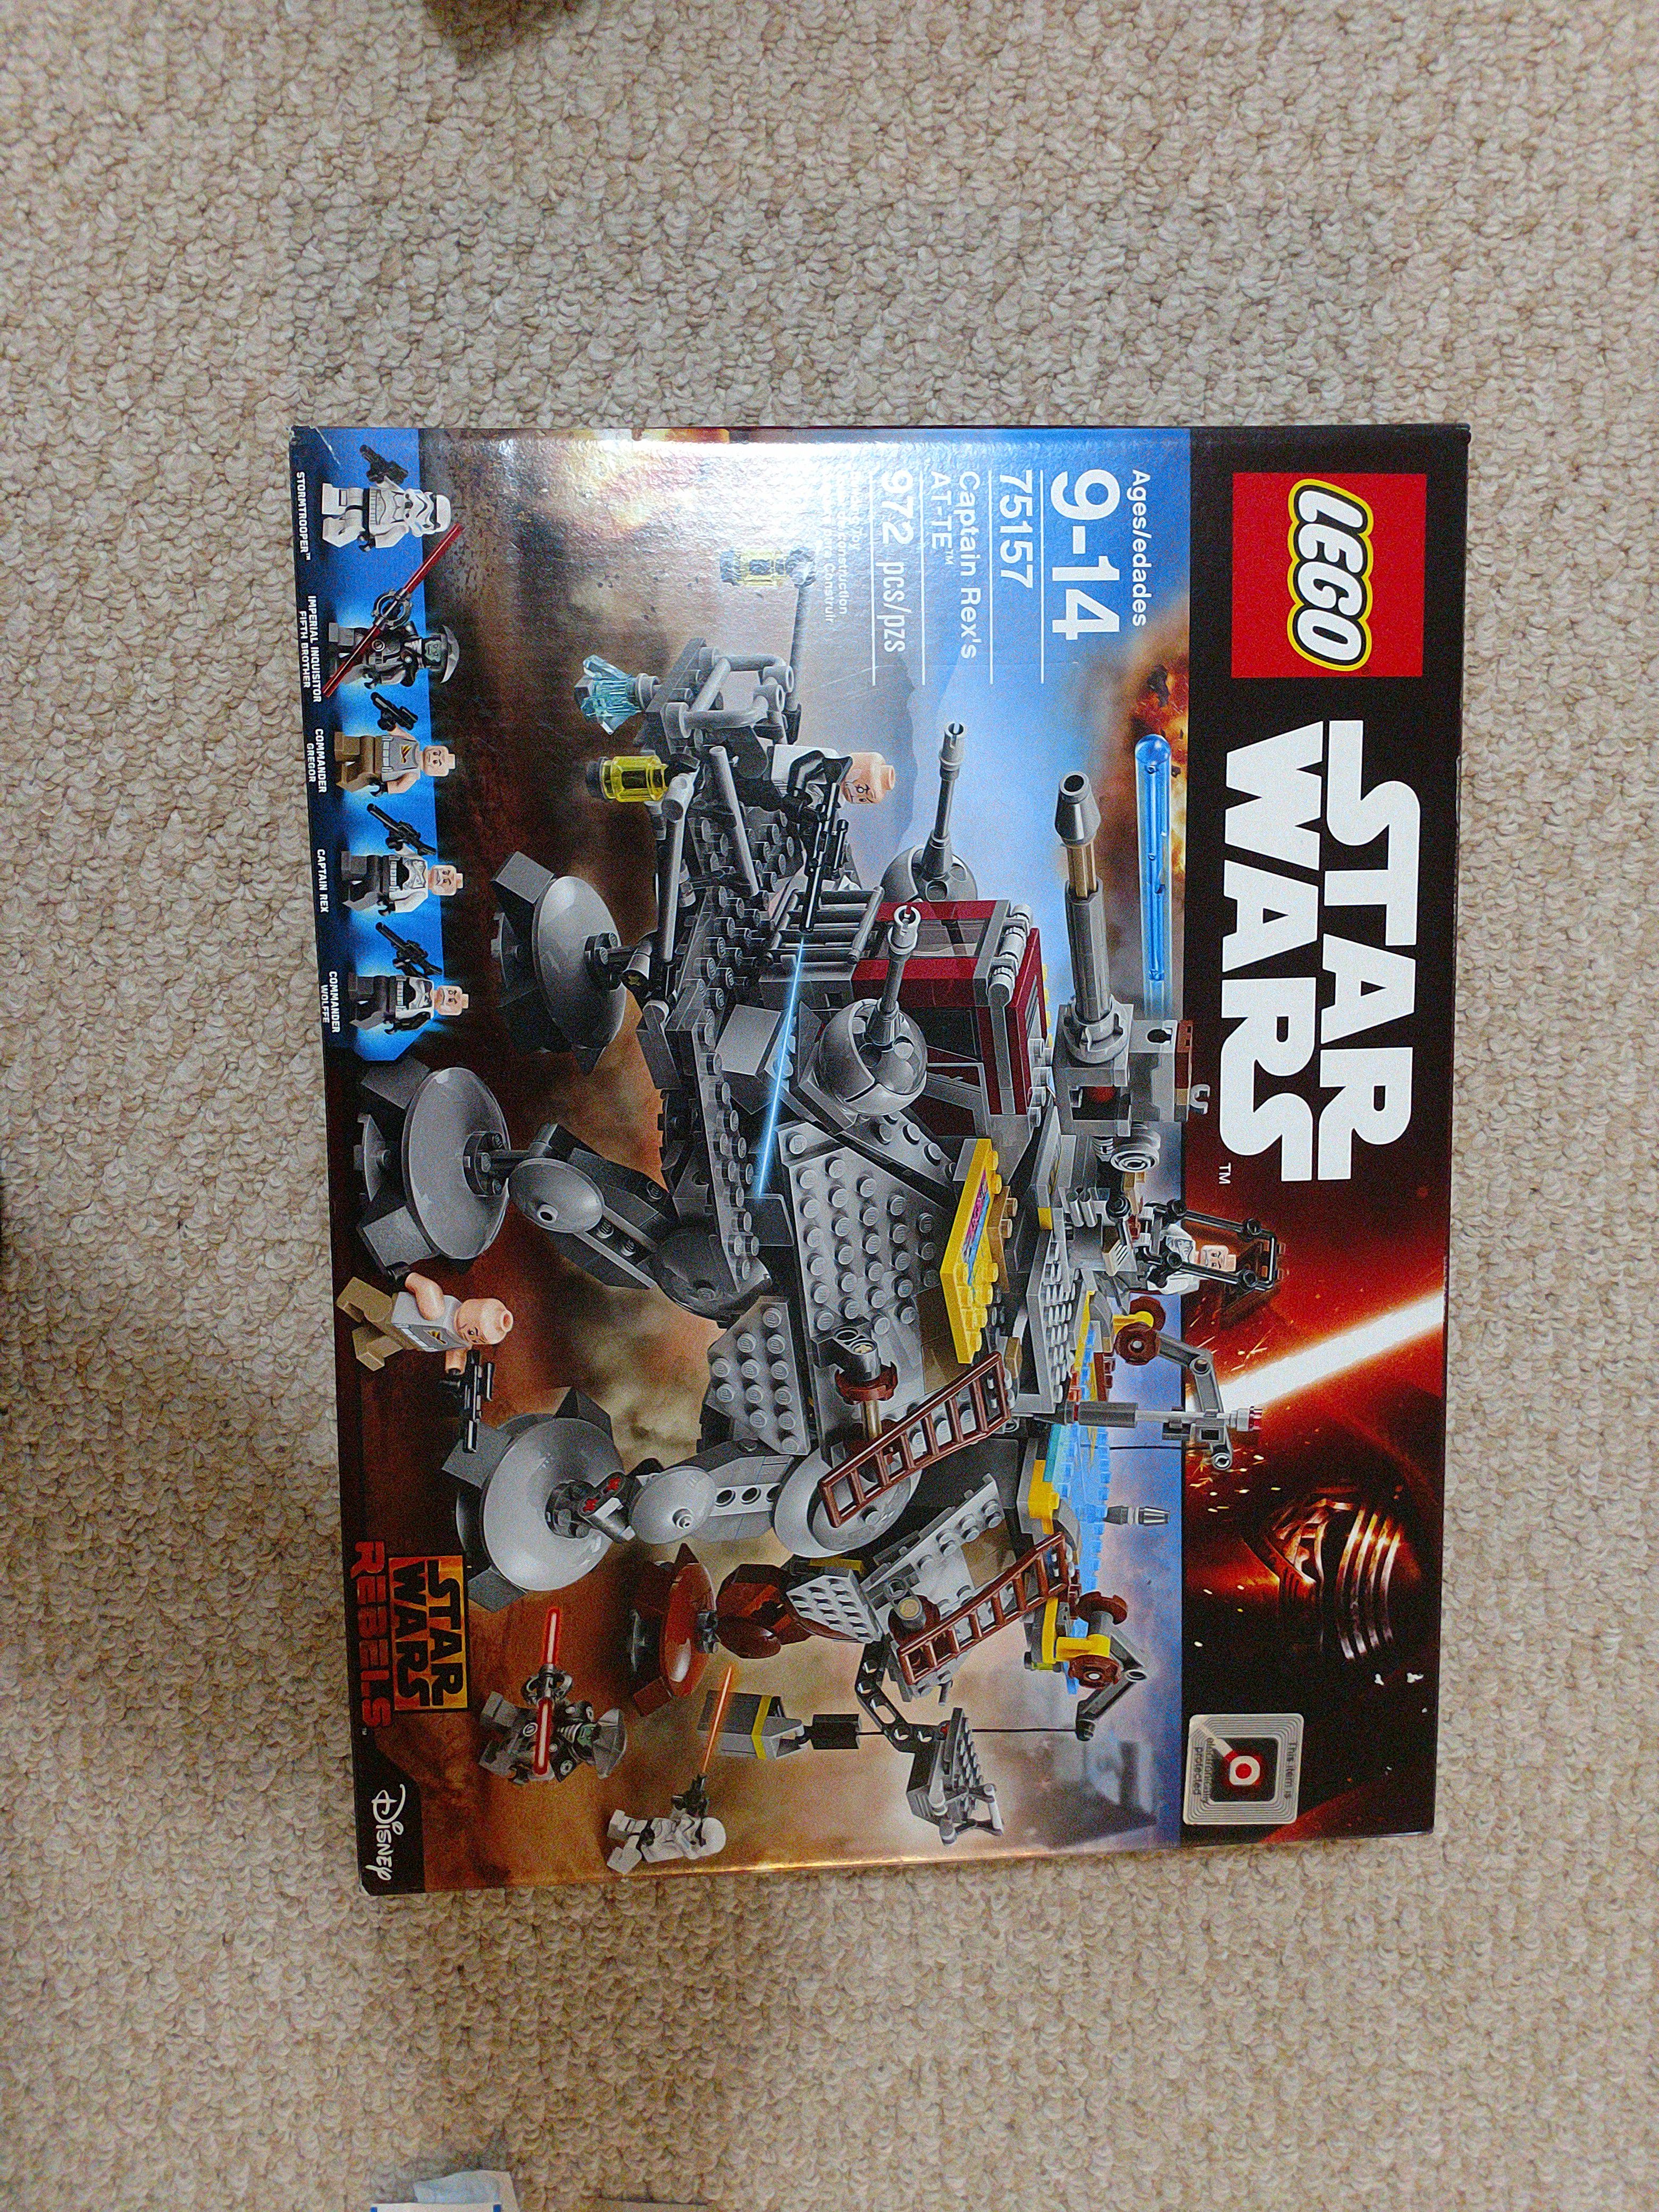 LEGO 75157 Brand New and sealed